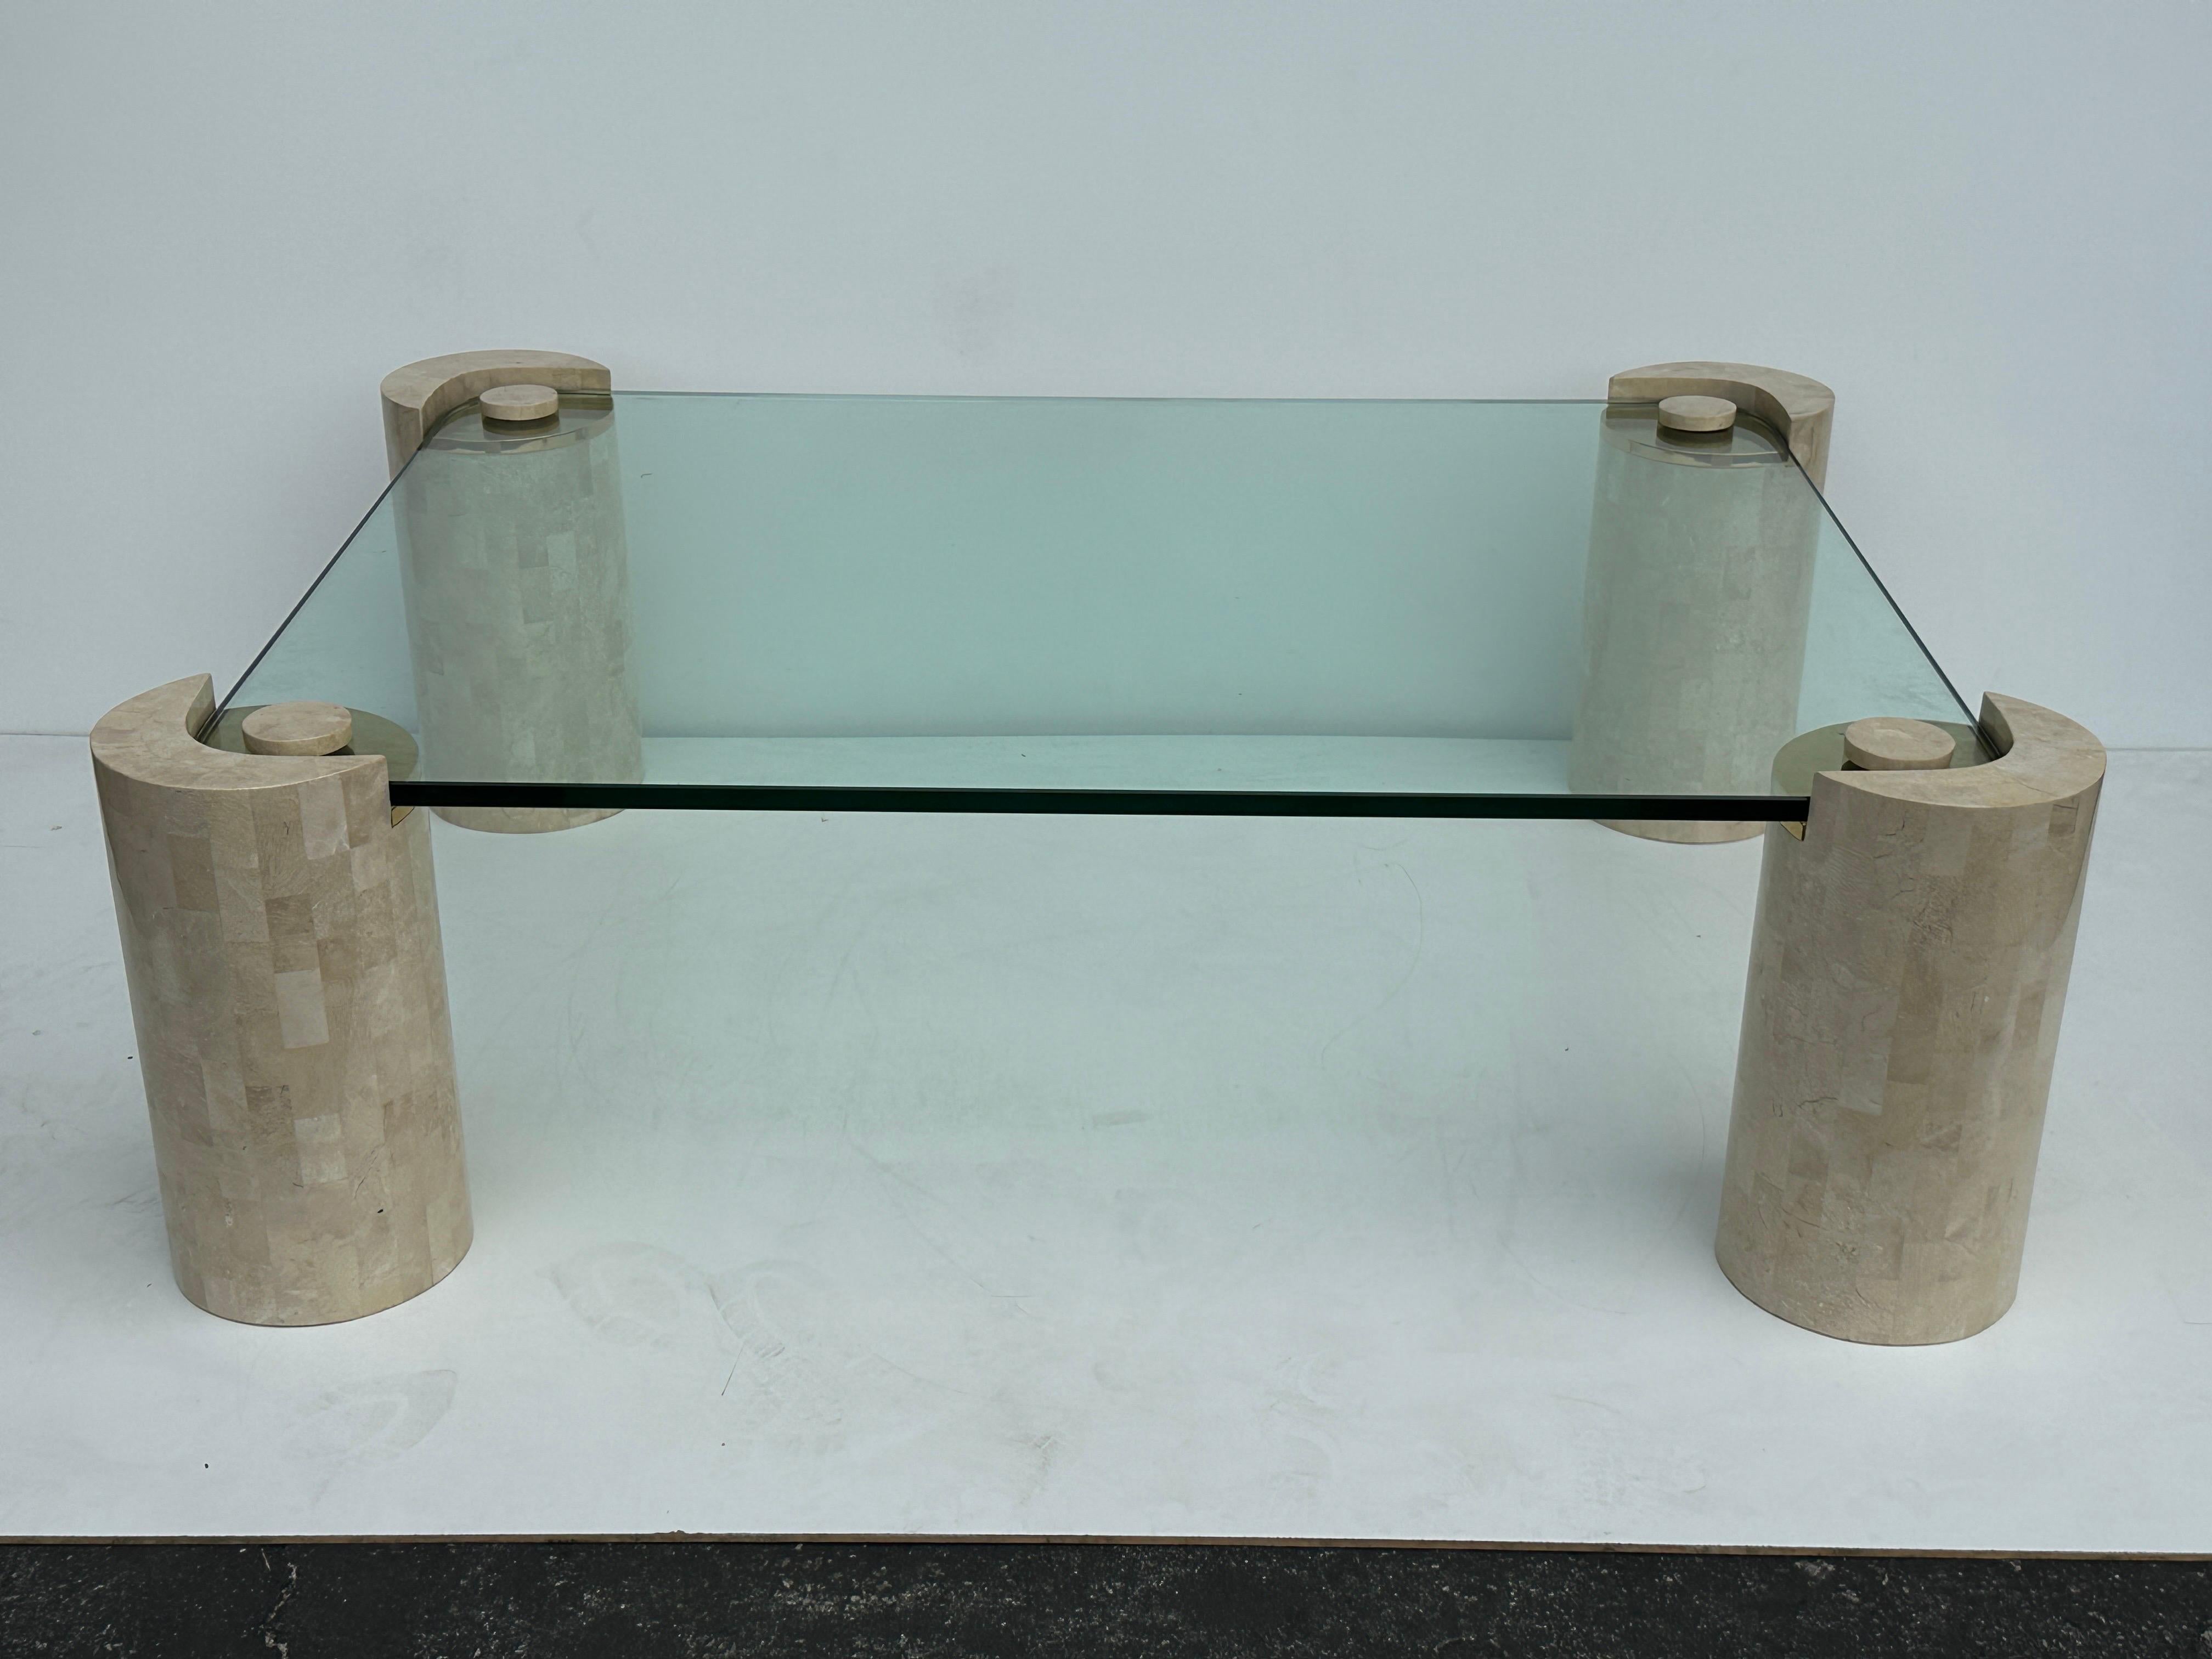 Karl Springer tessellated fossil coral and brass coffee table. Each leg measures 8” diameter by 16.25” high. Only glass top is 3/4” thick, 48” wide and 36” deep. Overall measurements are 52” x 40”x 16.25